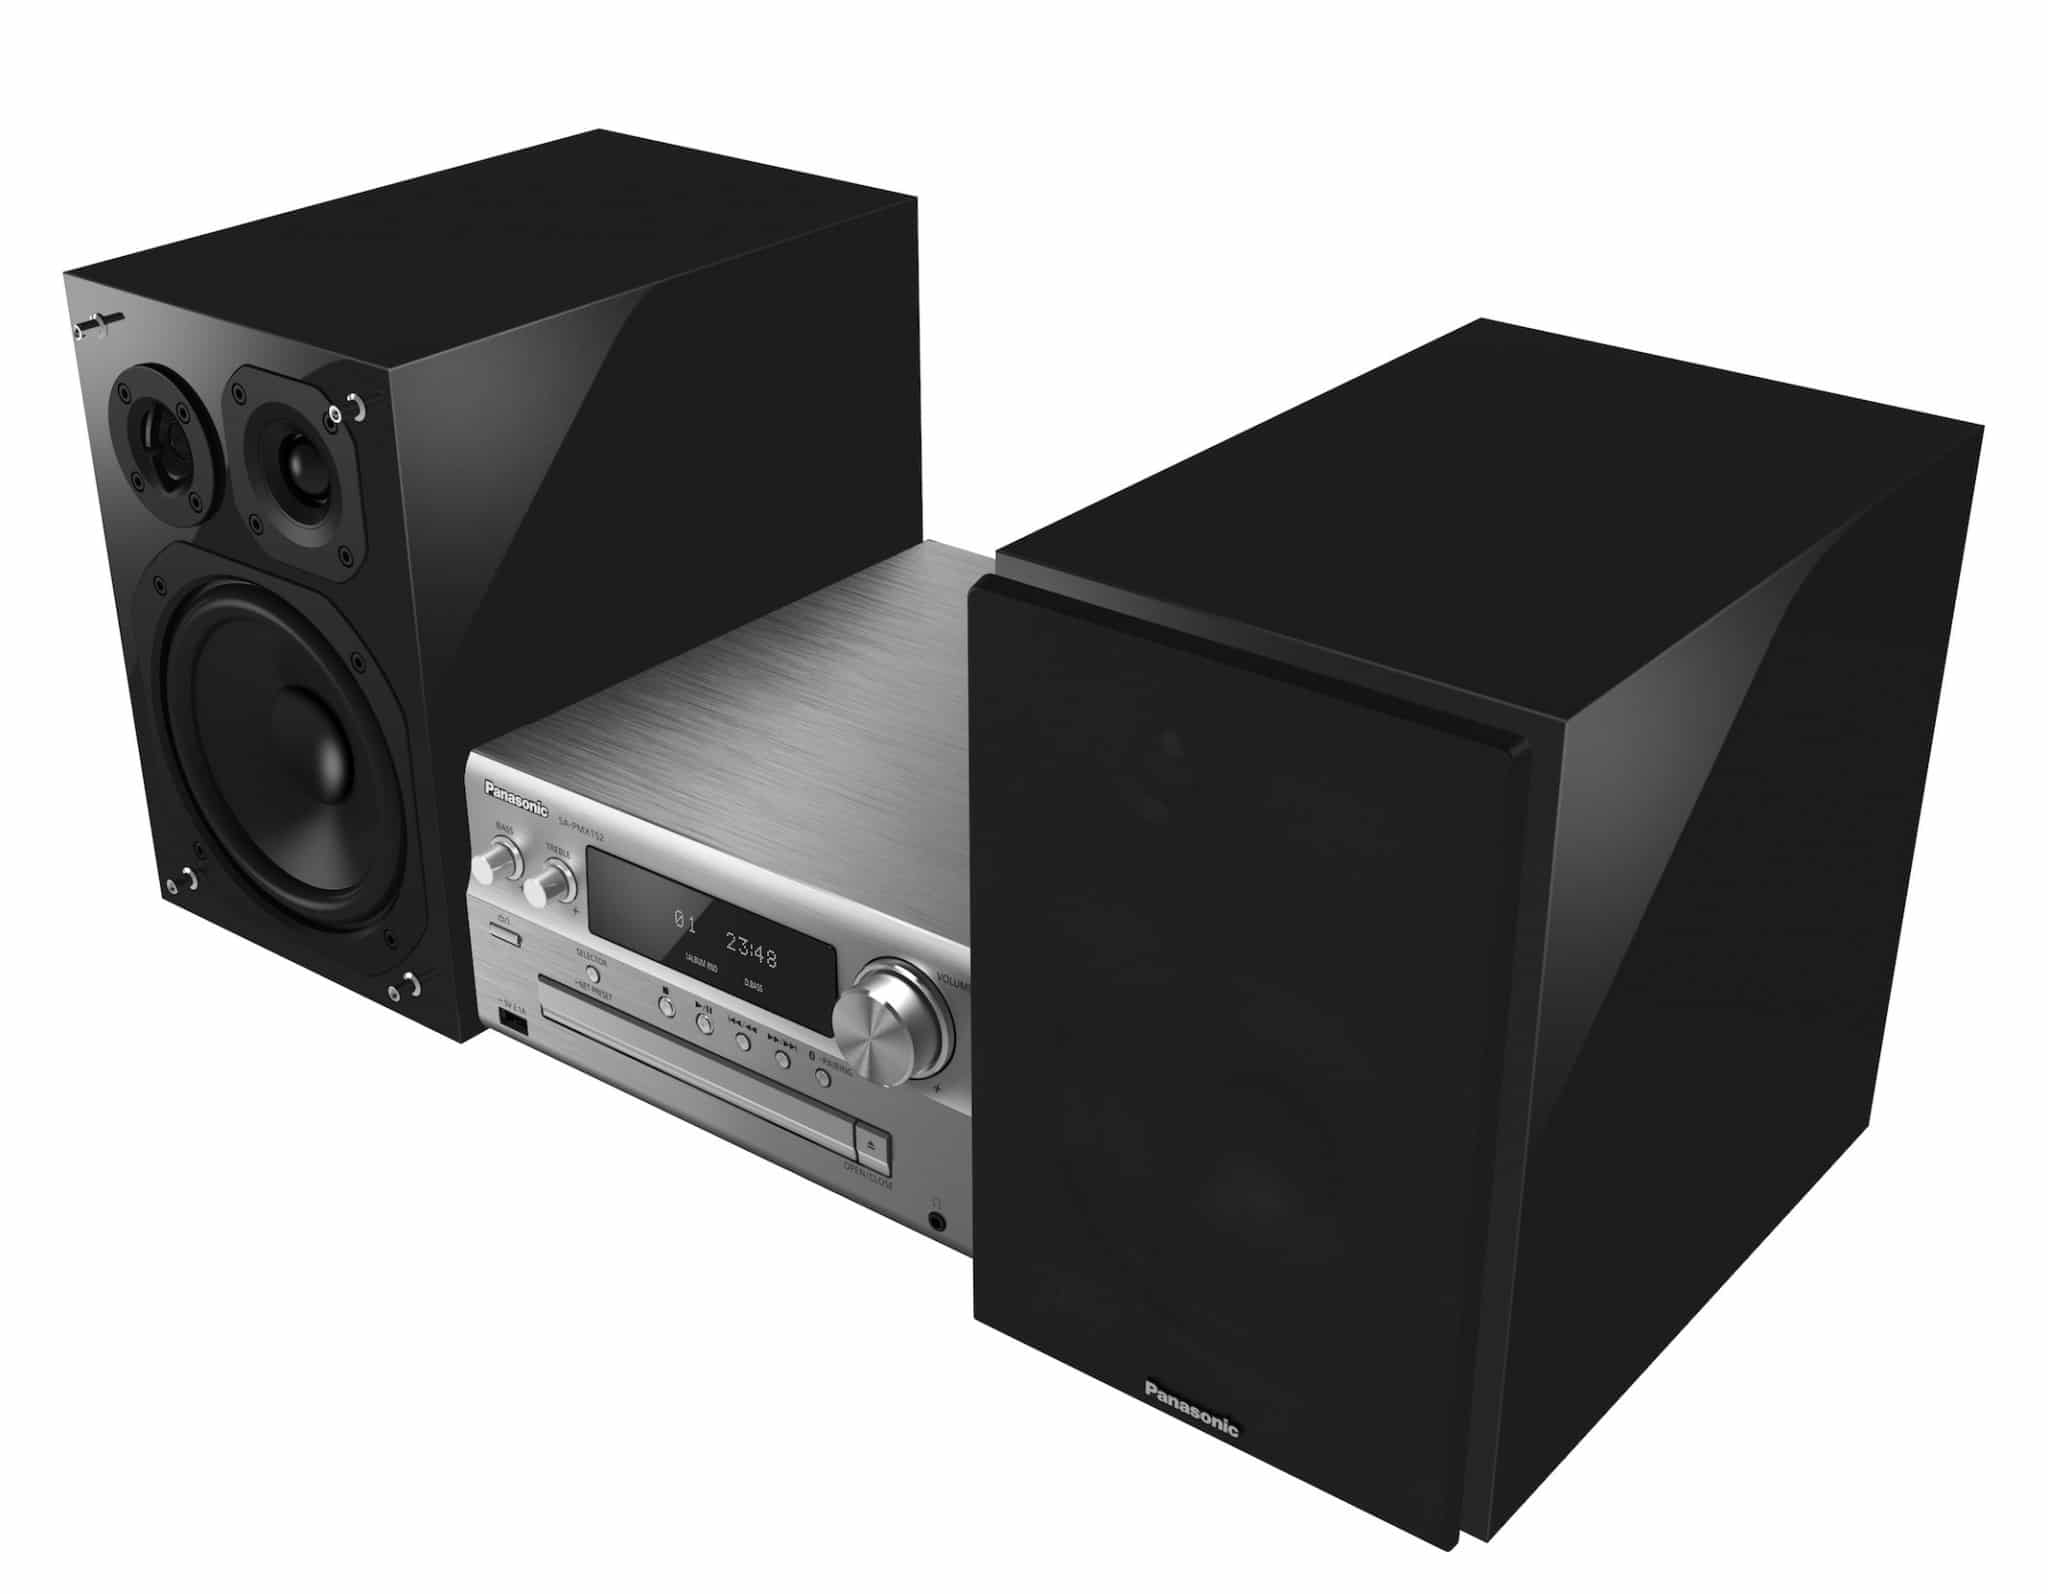 Panasonic Micro Hi-Fi systems: the SC-PMX152 and SC-PMX82 - The Audiophile  Man